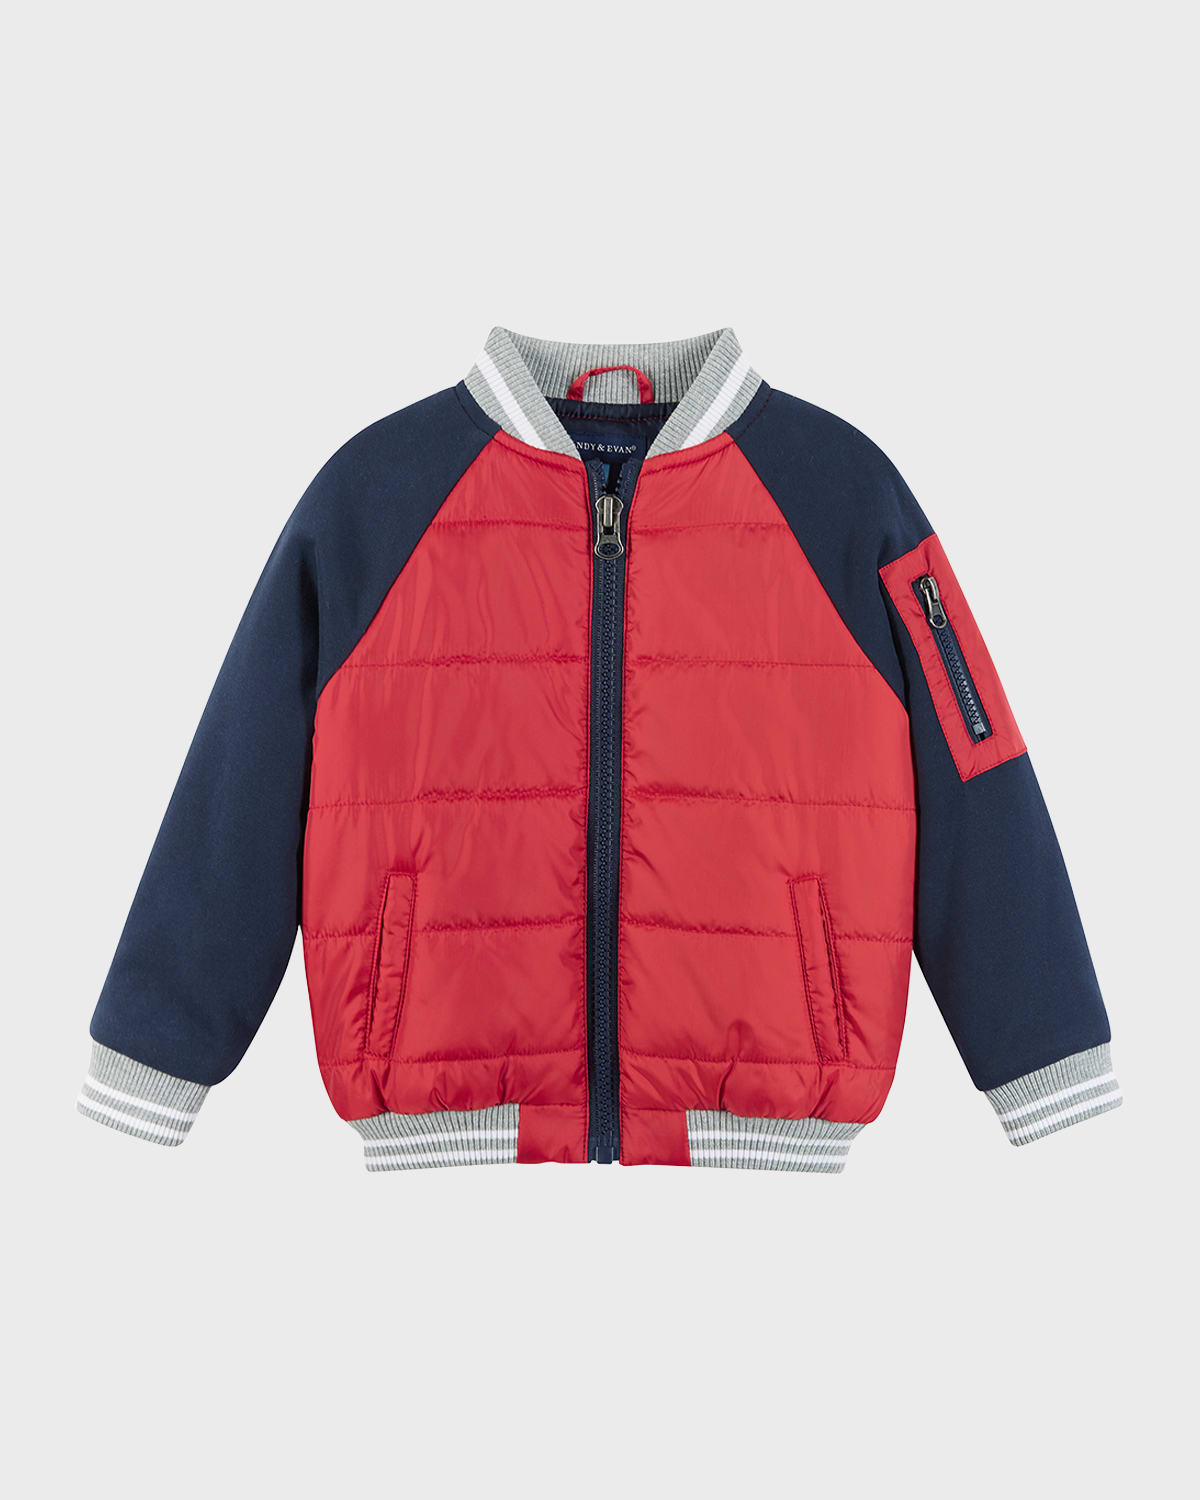 Andy & Evan Kids' Boy's Mixed Media Quilted Bomber Jacket In Red Navy Grey